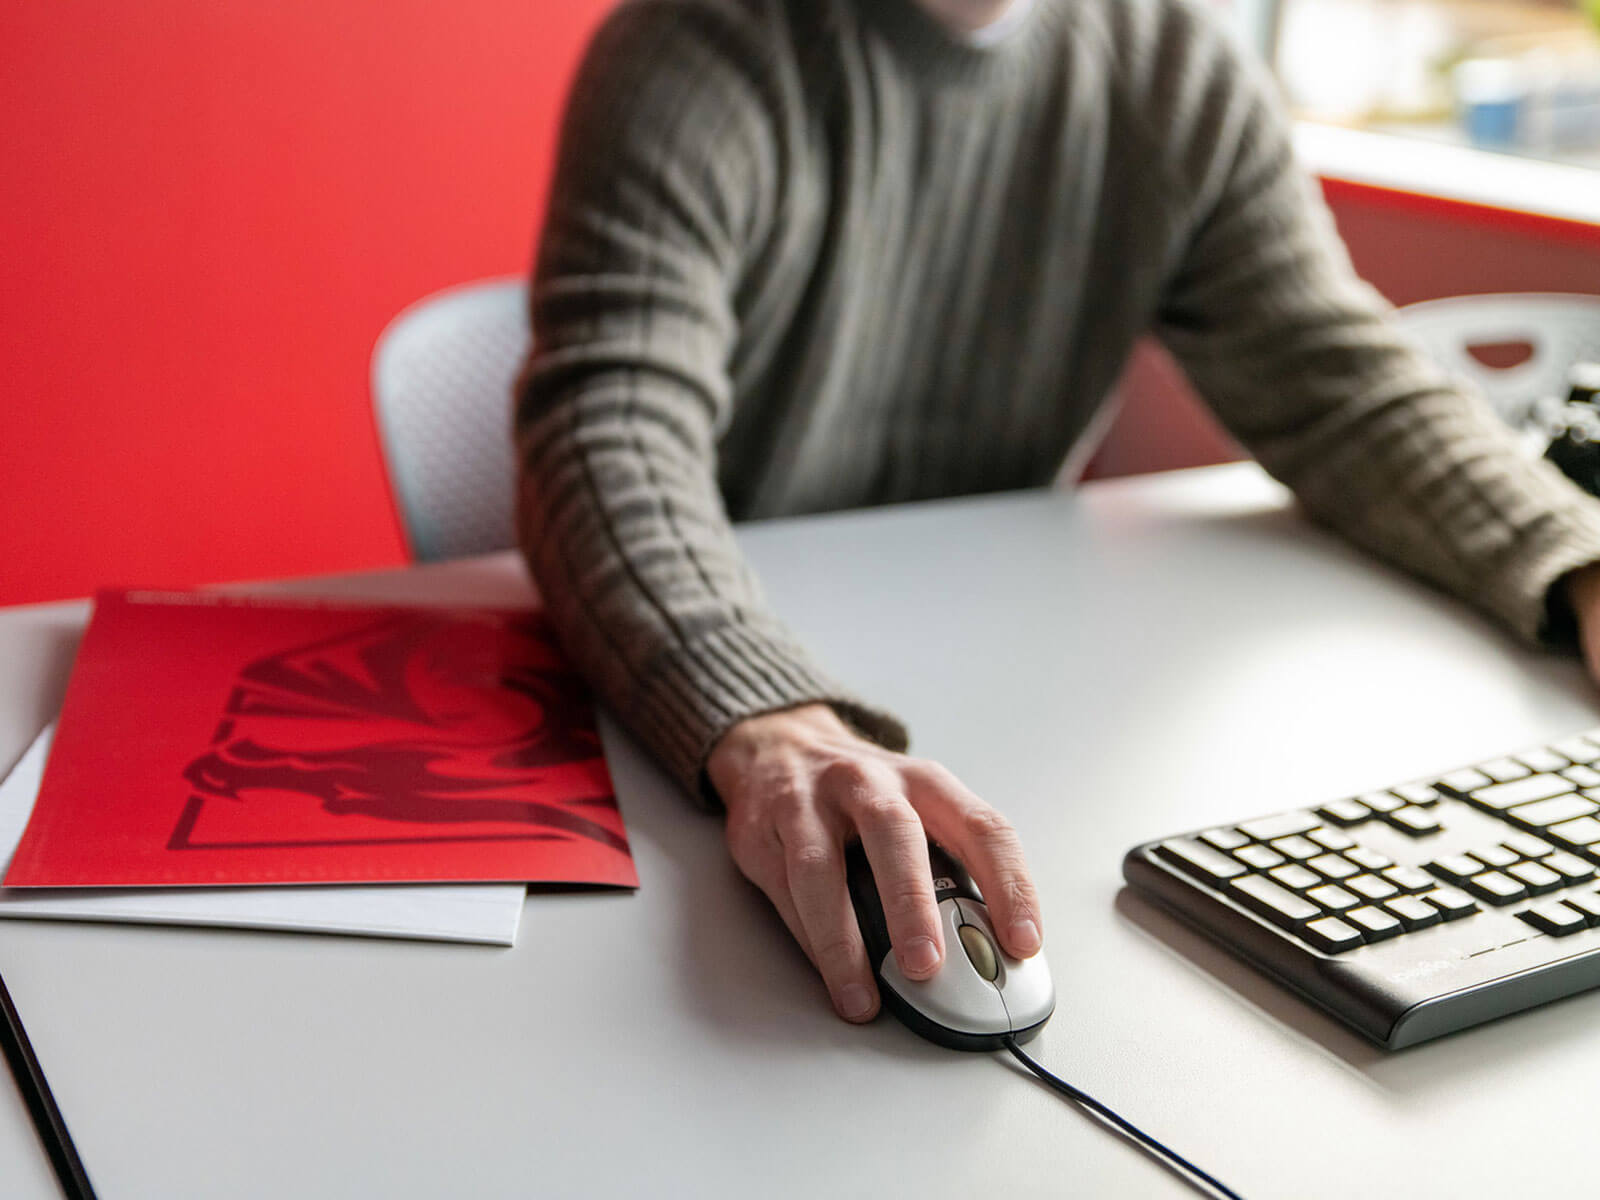 Angled view of a male faculty member using a mouse next to a DigiPen branded red folder